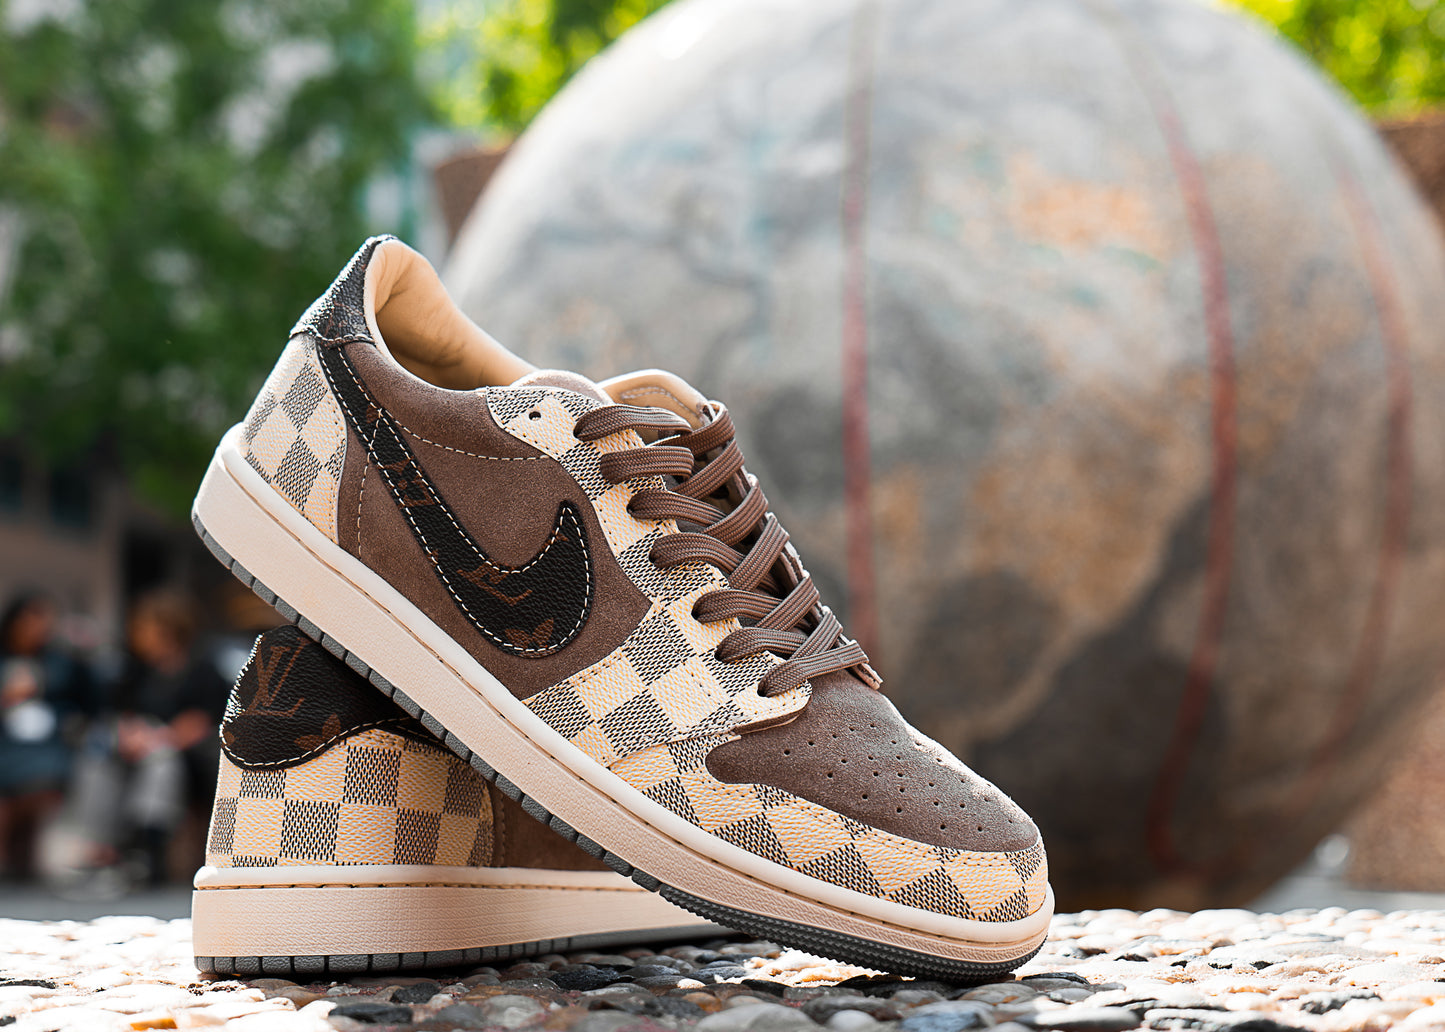 Upcycled Luxury: Louis AJ1 Lows